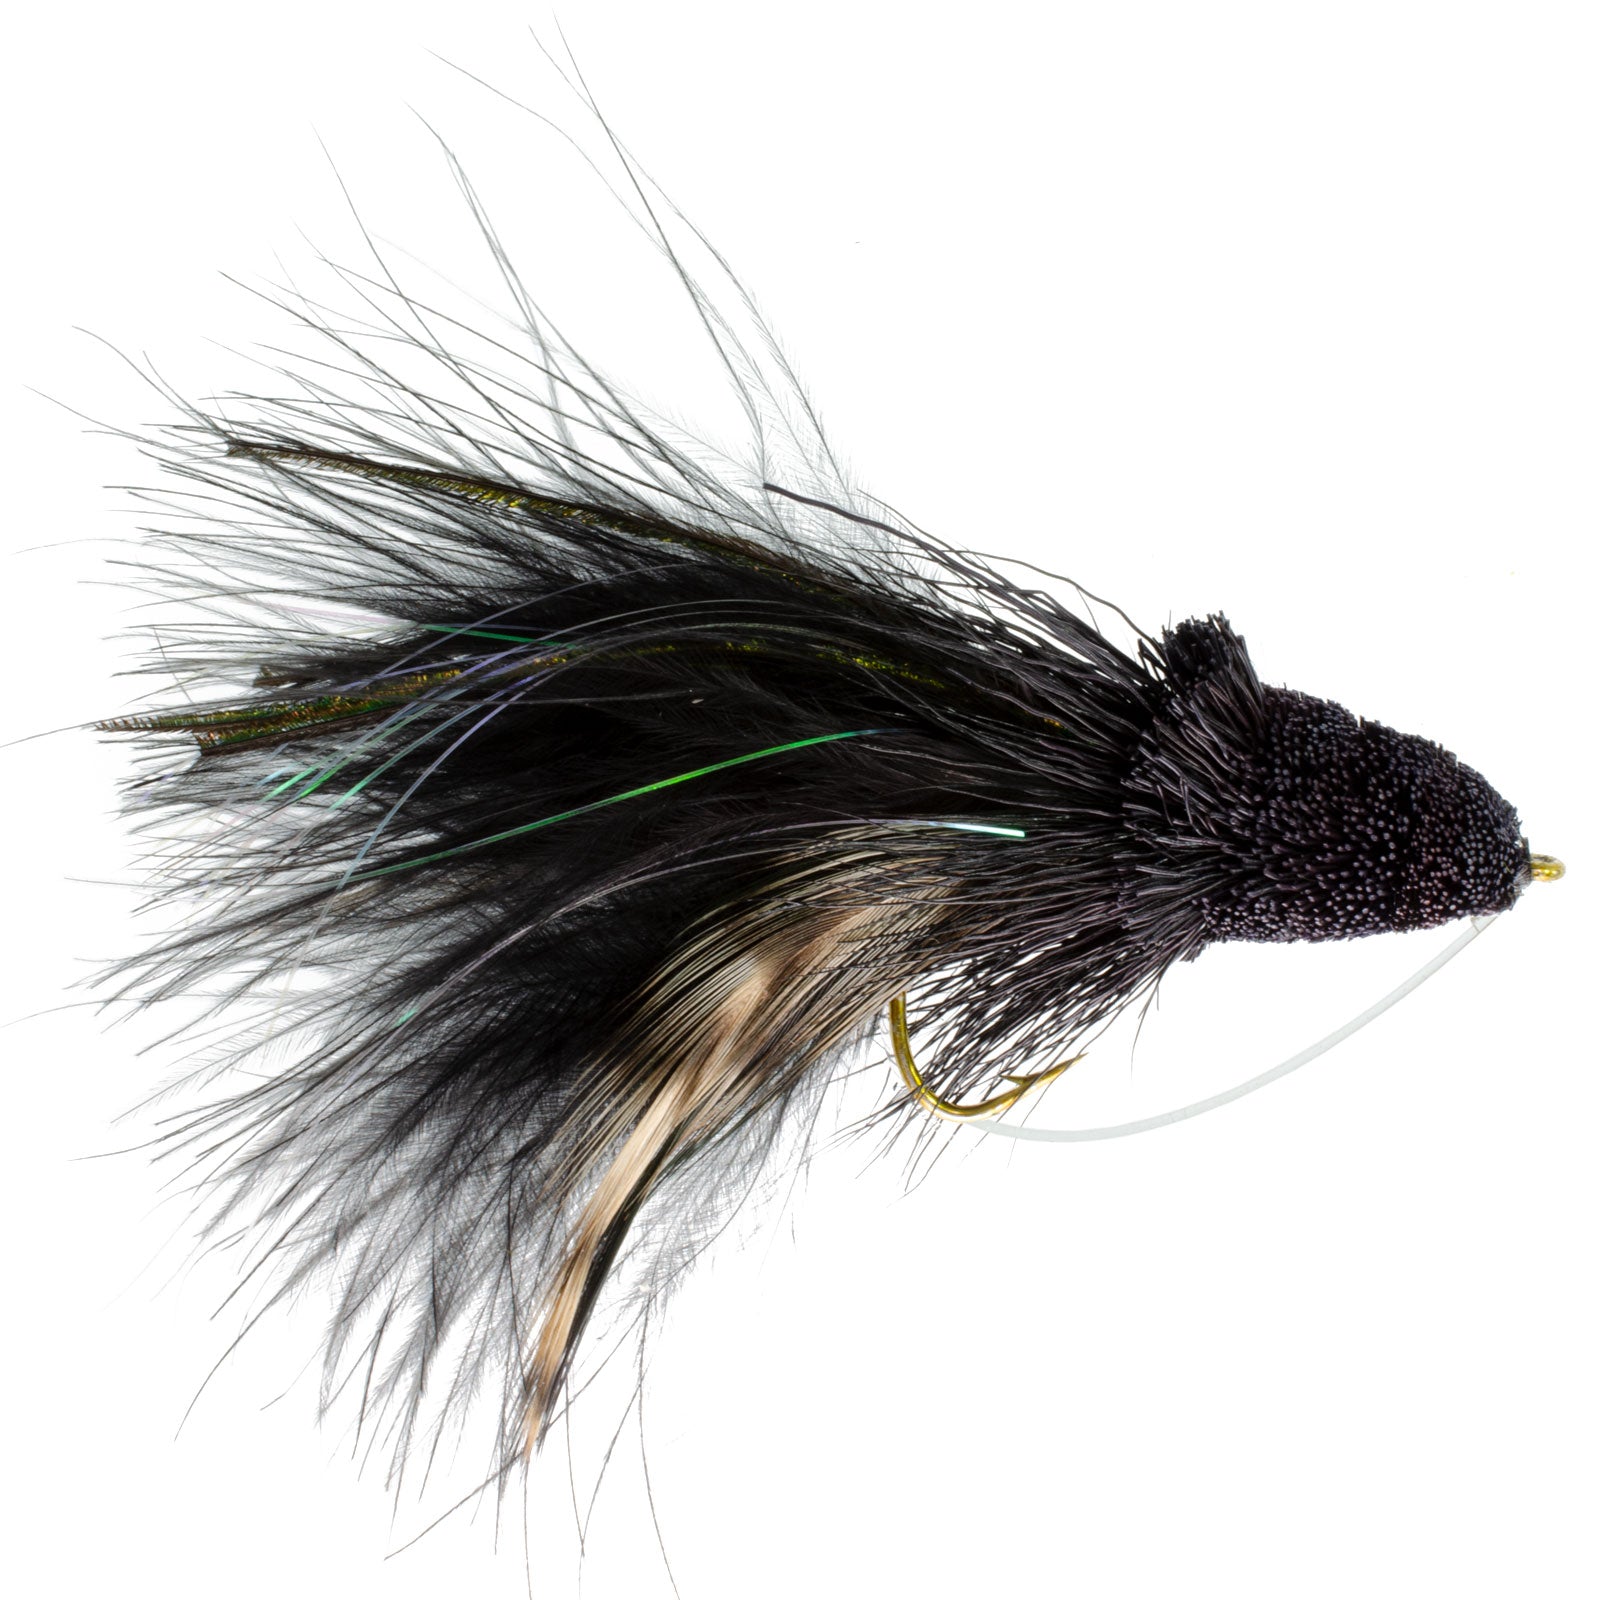  Wild Water Fly Fishing Black Rabbit Tail Diver Deer Hair Flies  for Largemouth Bass, Northern Pike, Smallmouth Bass, Trout, Size 1/0, 2  Pack : Dry Terrestrial Fishing Flies : Sports & Outdoors